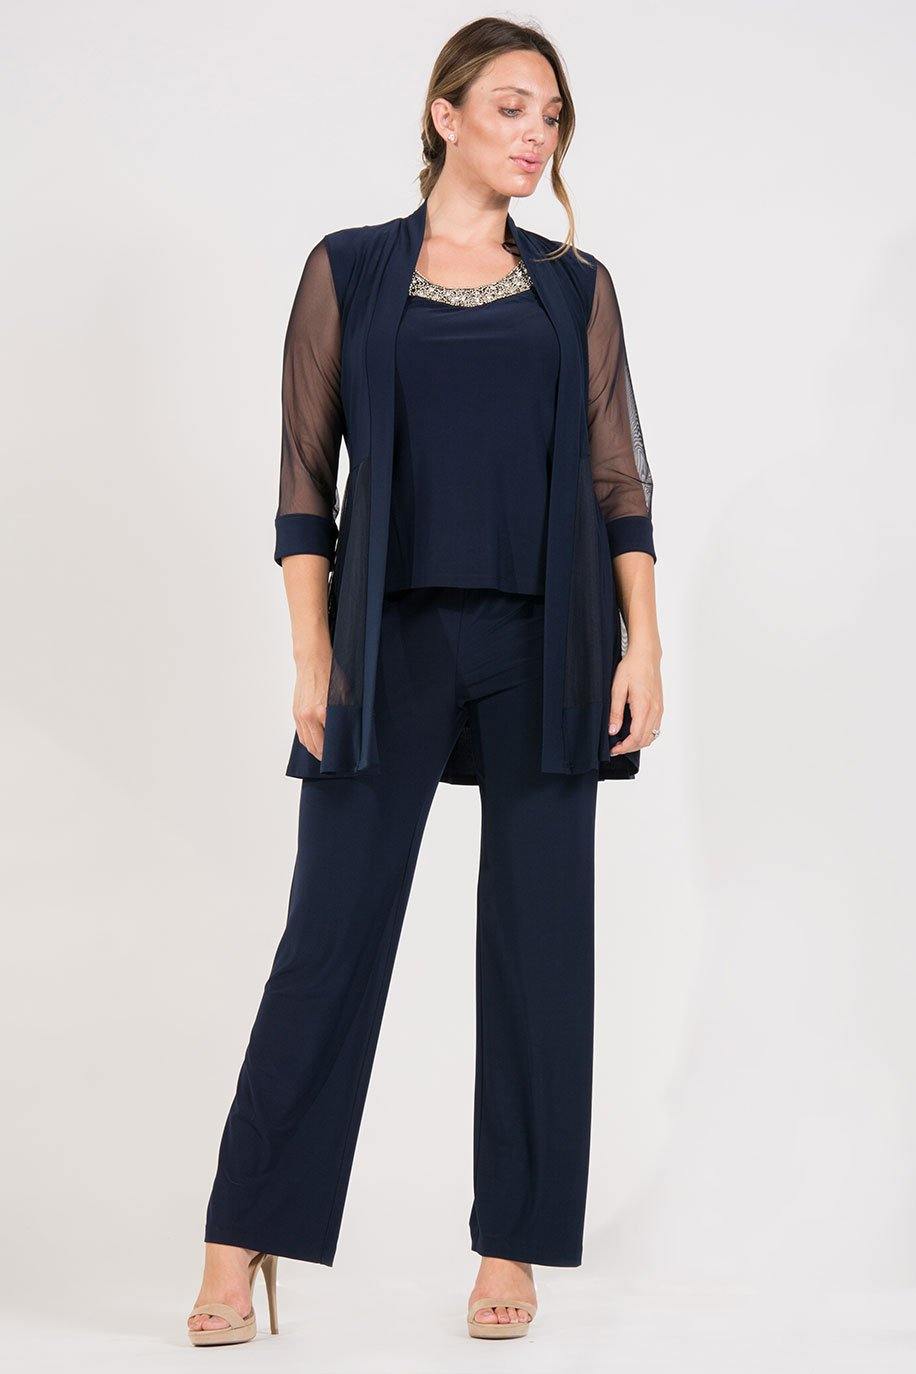 R&M Richards Mother of the Bride Formal Pants Suit Navy